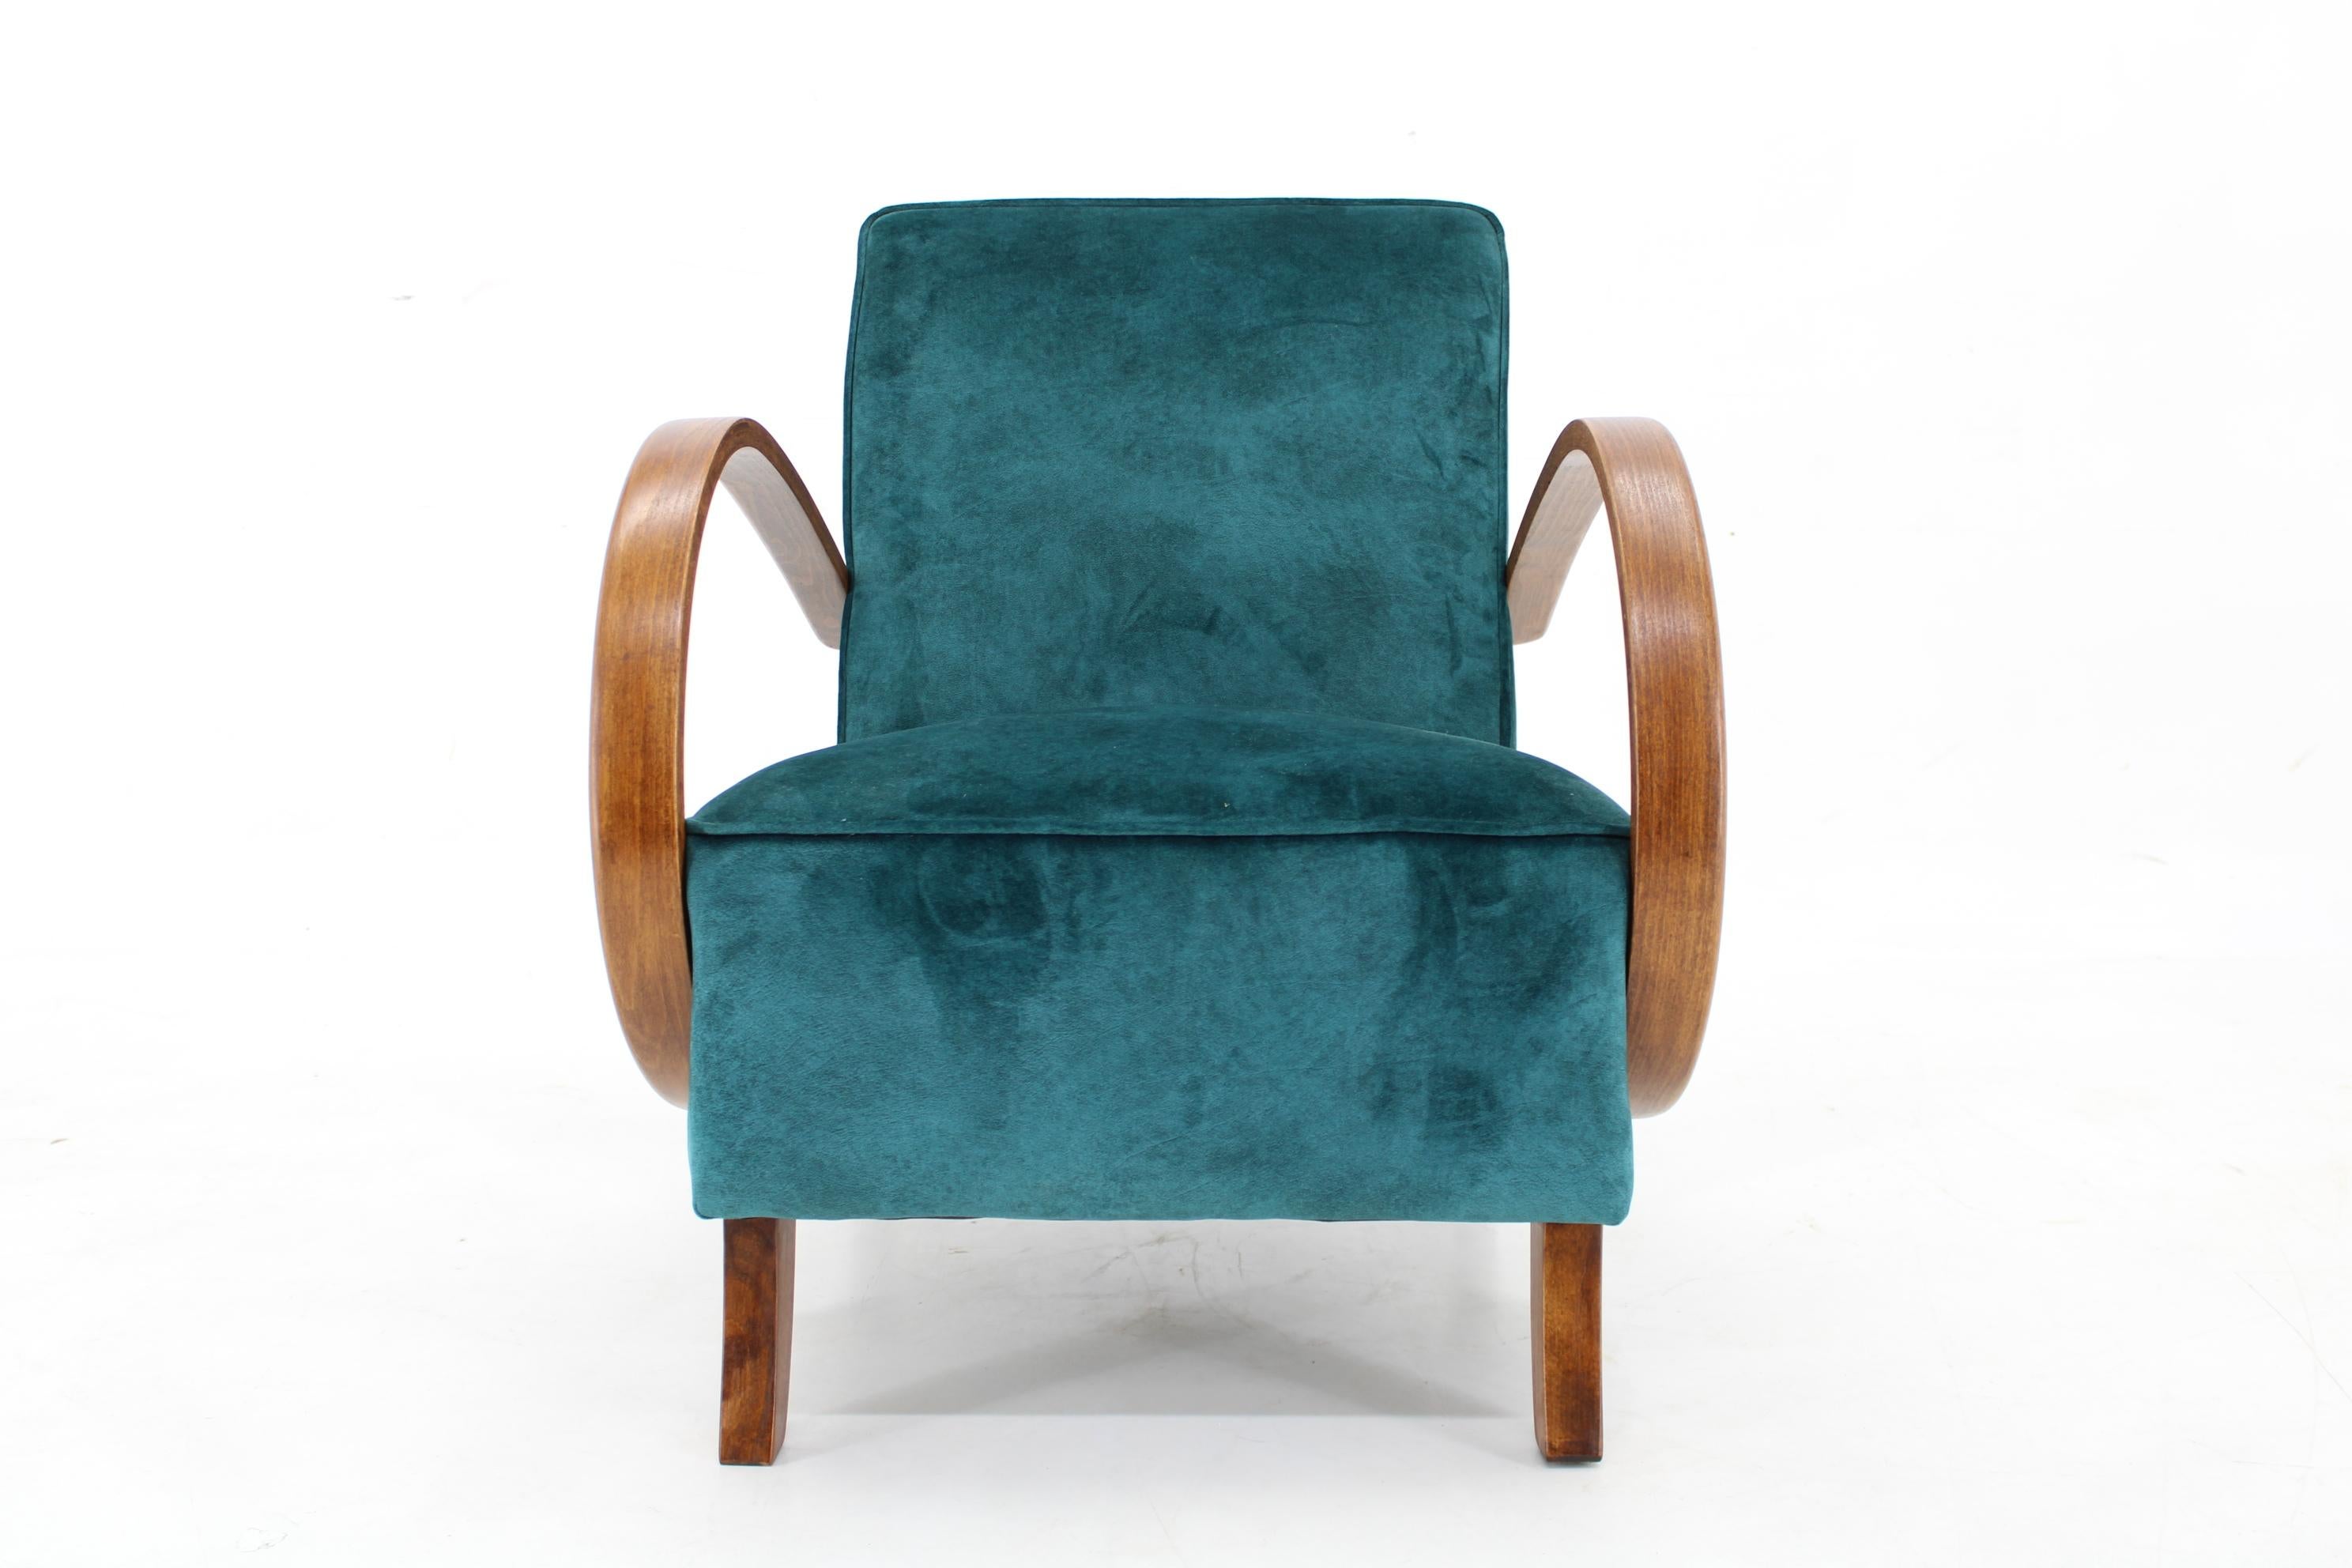 - Newly upholstered 
- The wooden parts have been refurbished 
- The seat height is 41 cm 